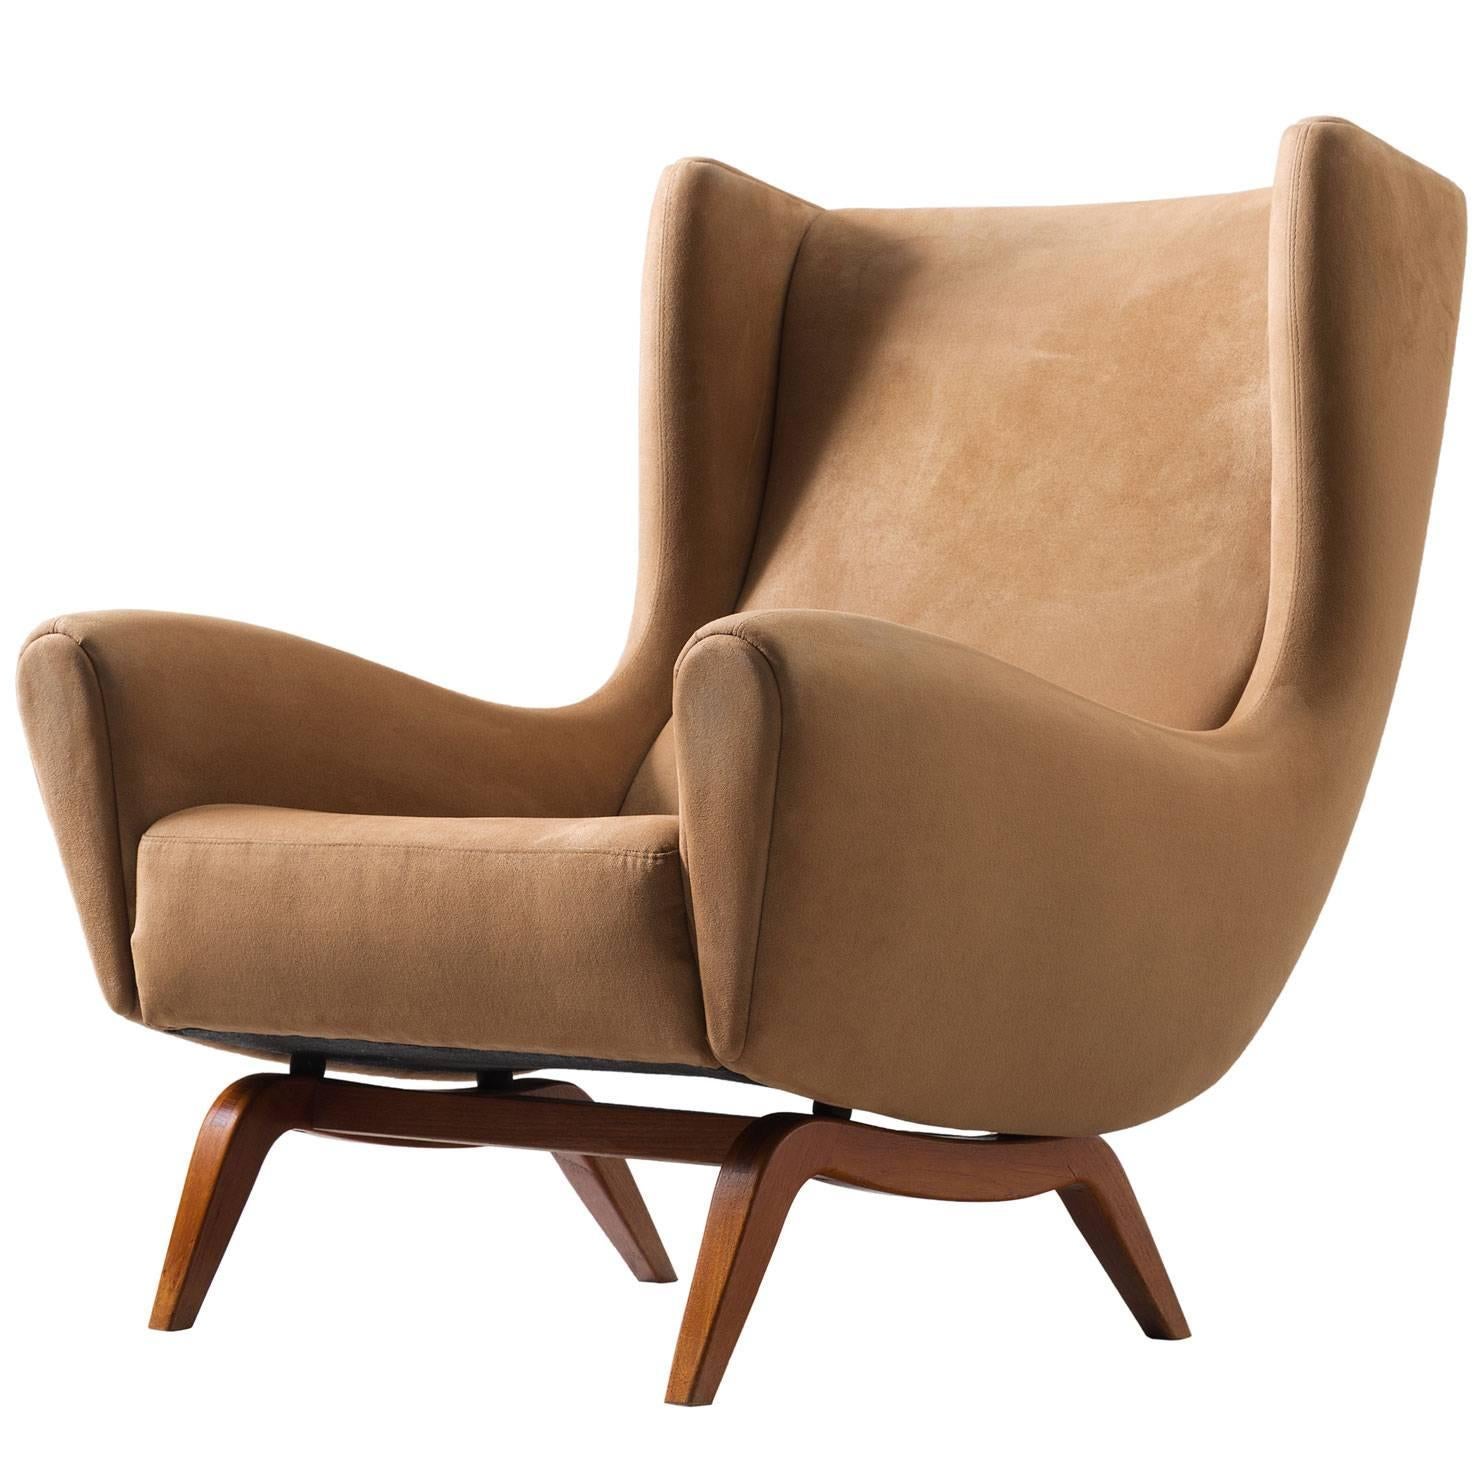 Illum Wikkelsø '110' Lounge Chair in Teak and Liver Colored Upholstery